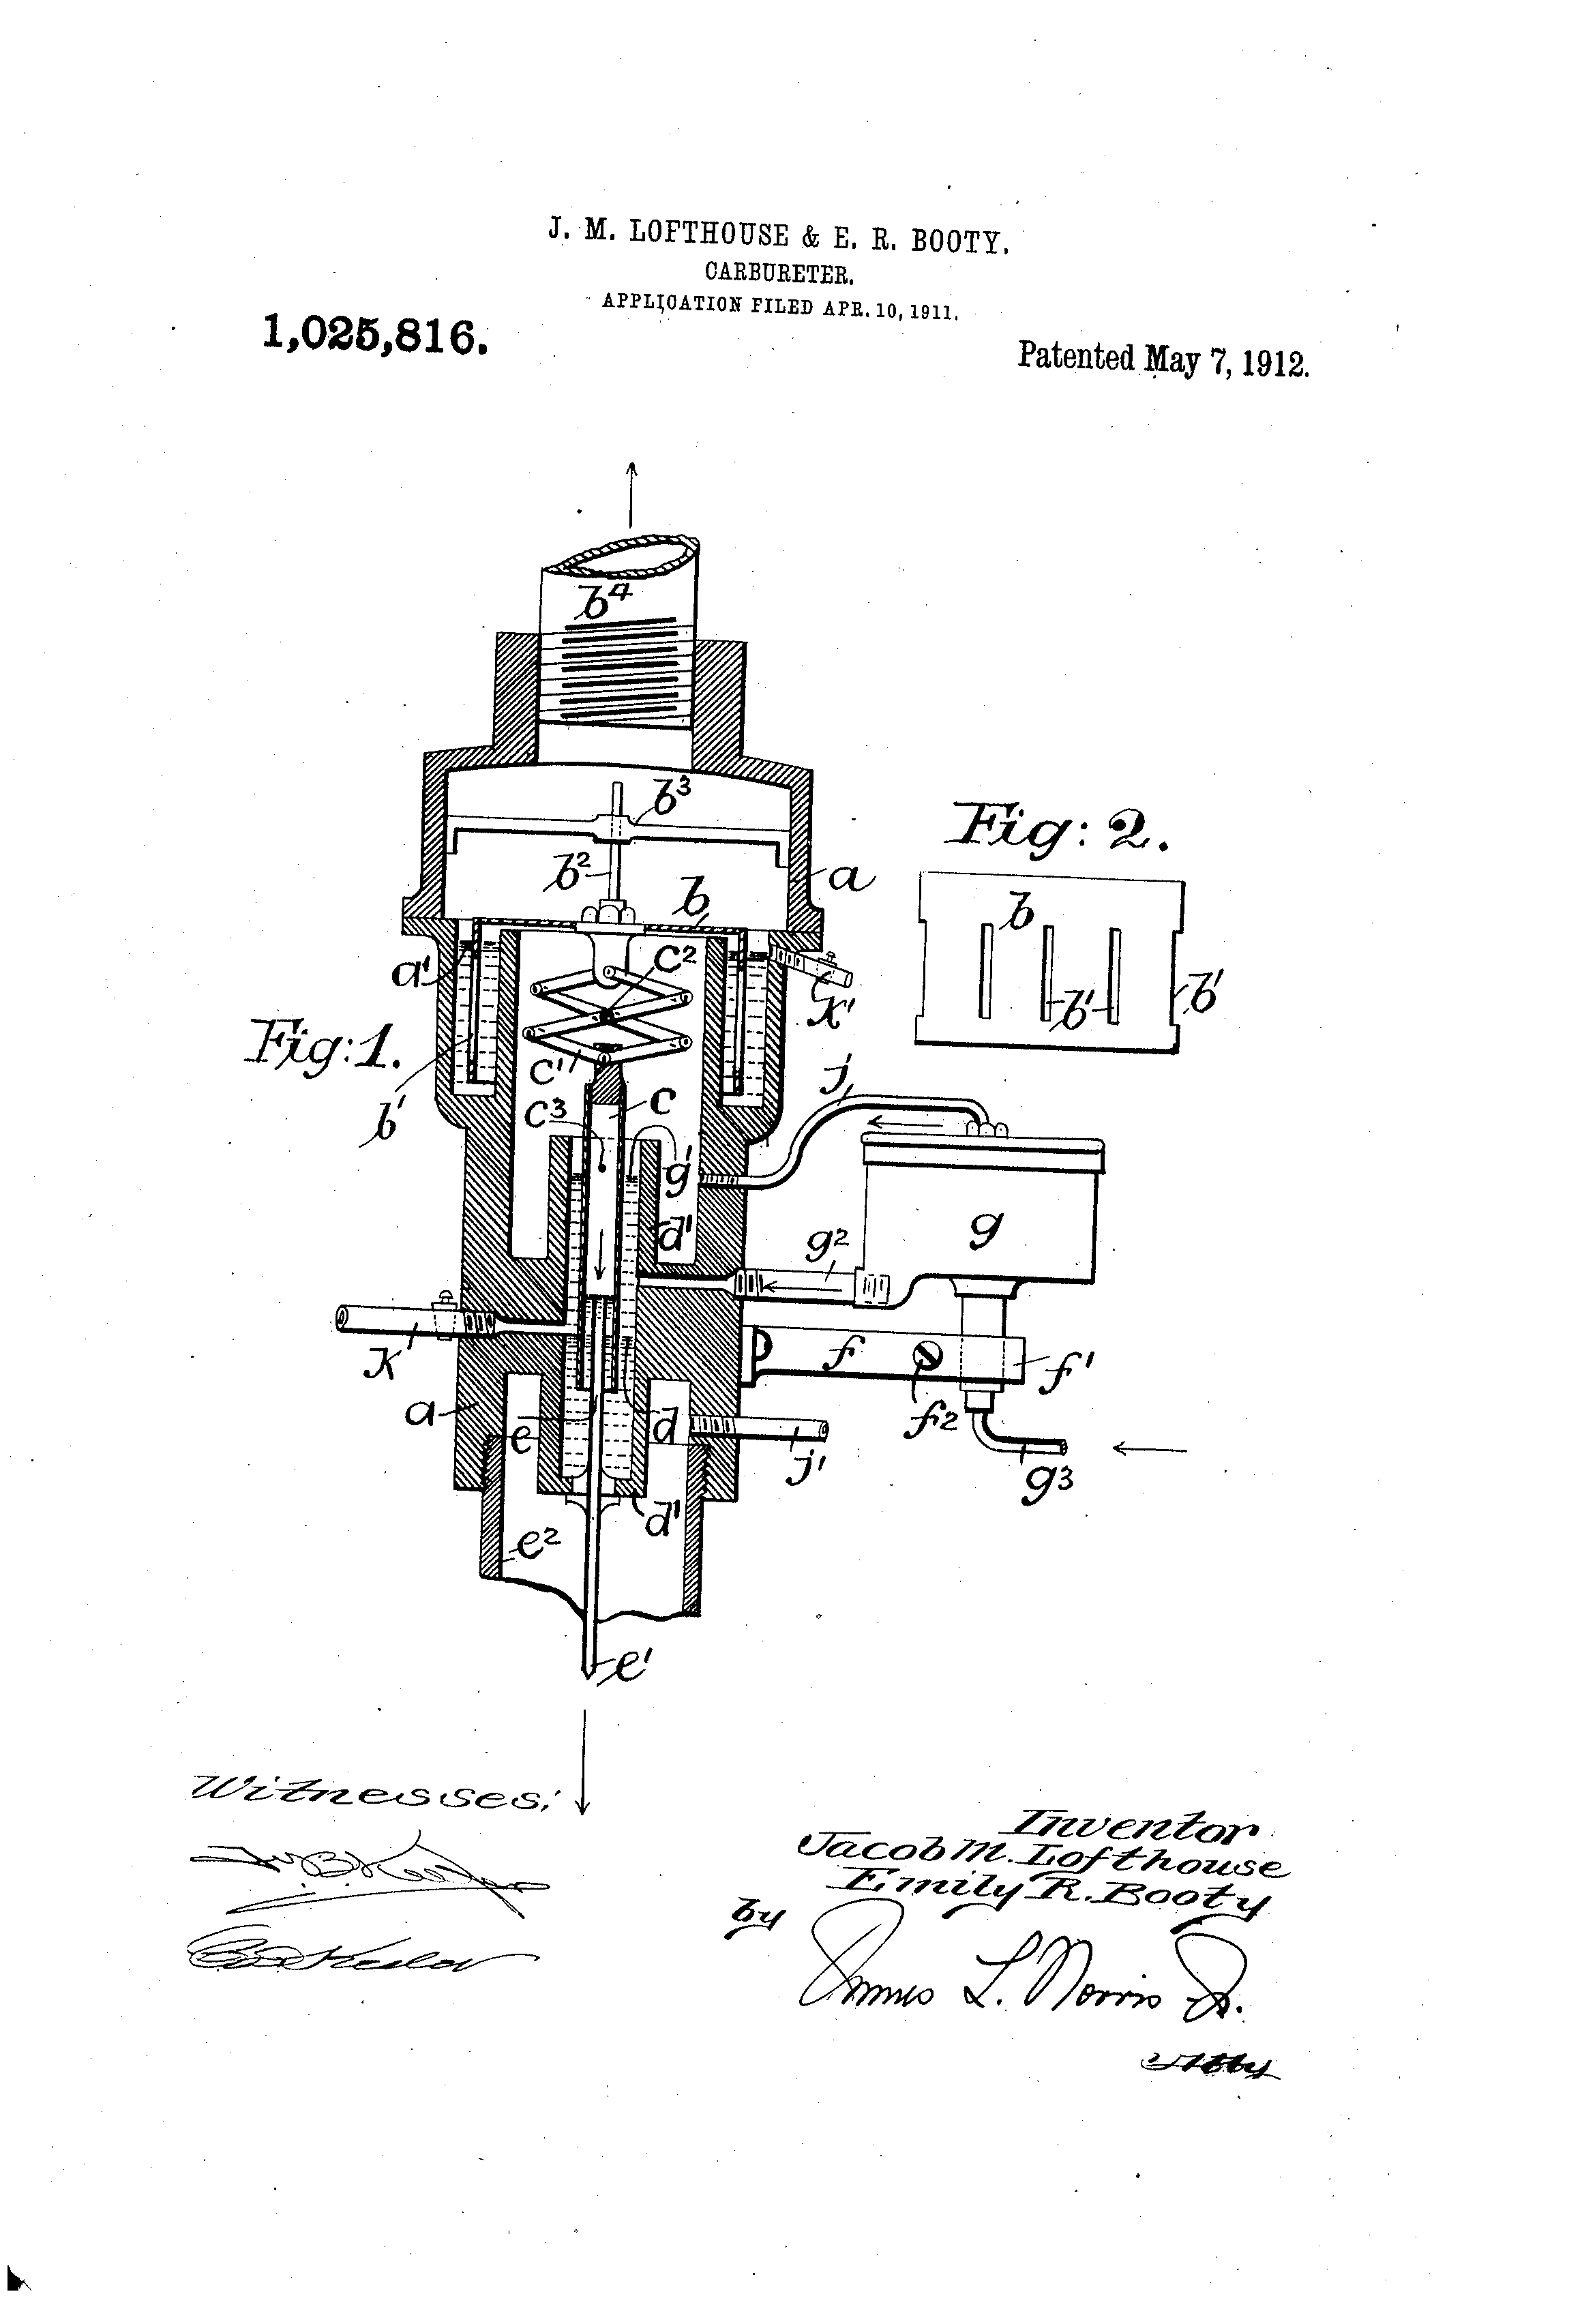 The Booty-Lofthouse apparatus US Patent, Google Patents